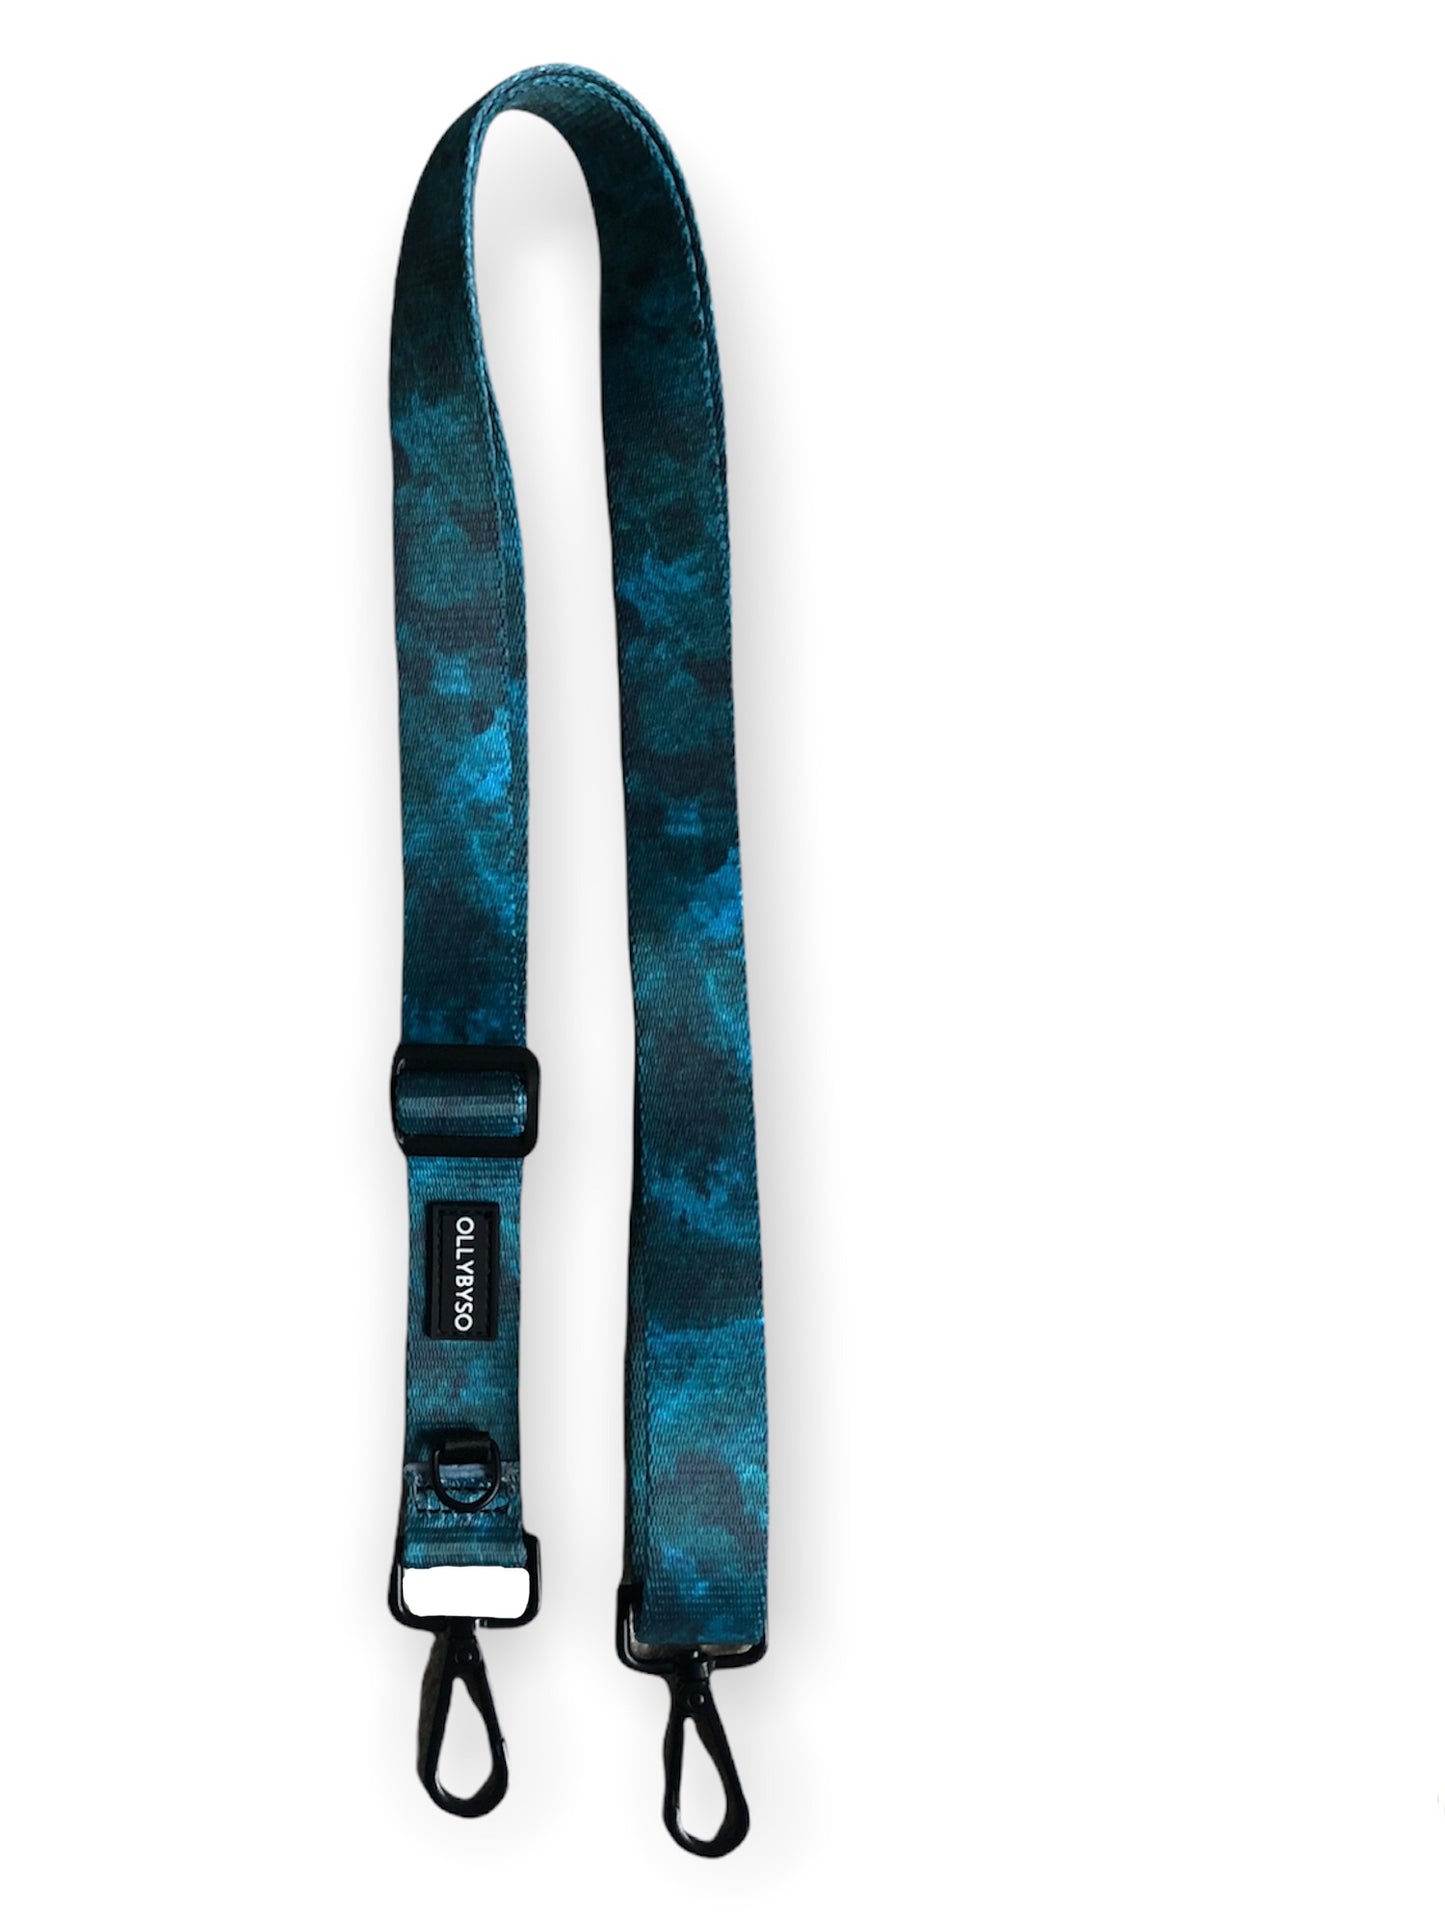 Out with the dog Bag Strap - Emerald